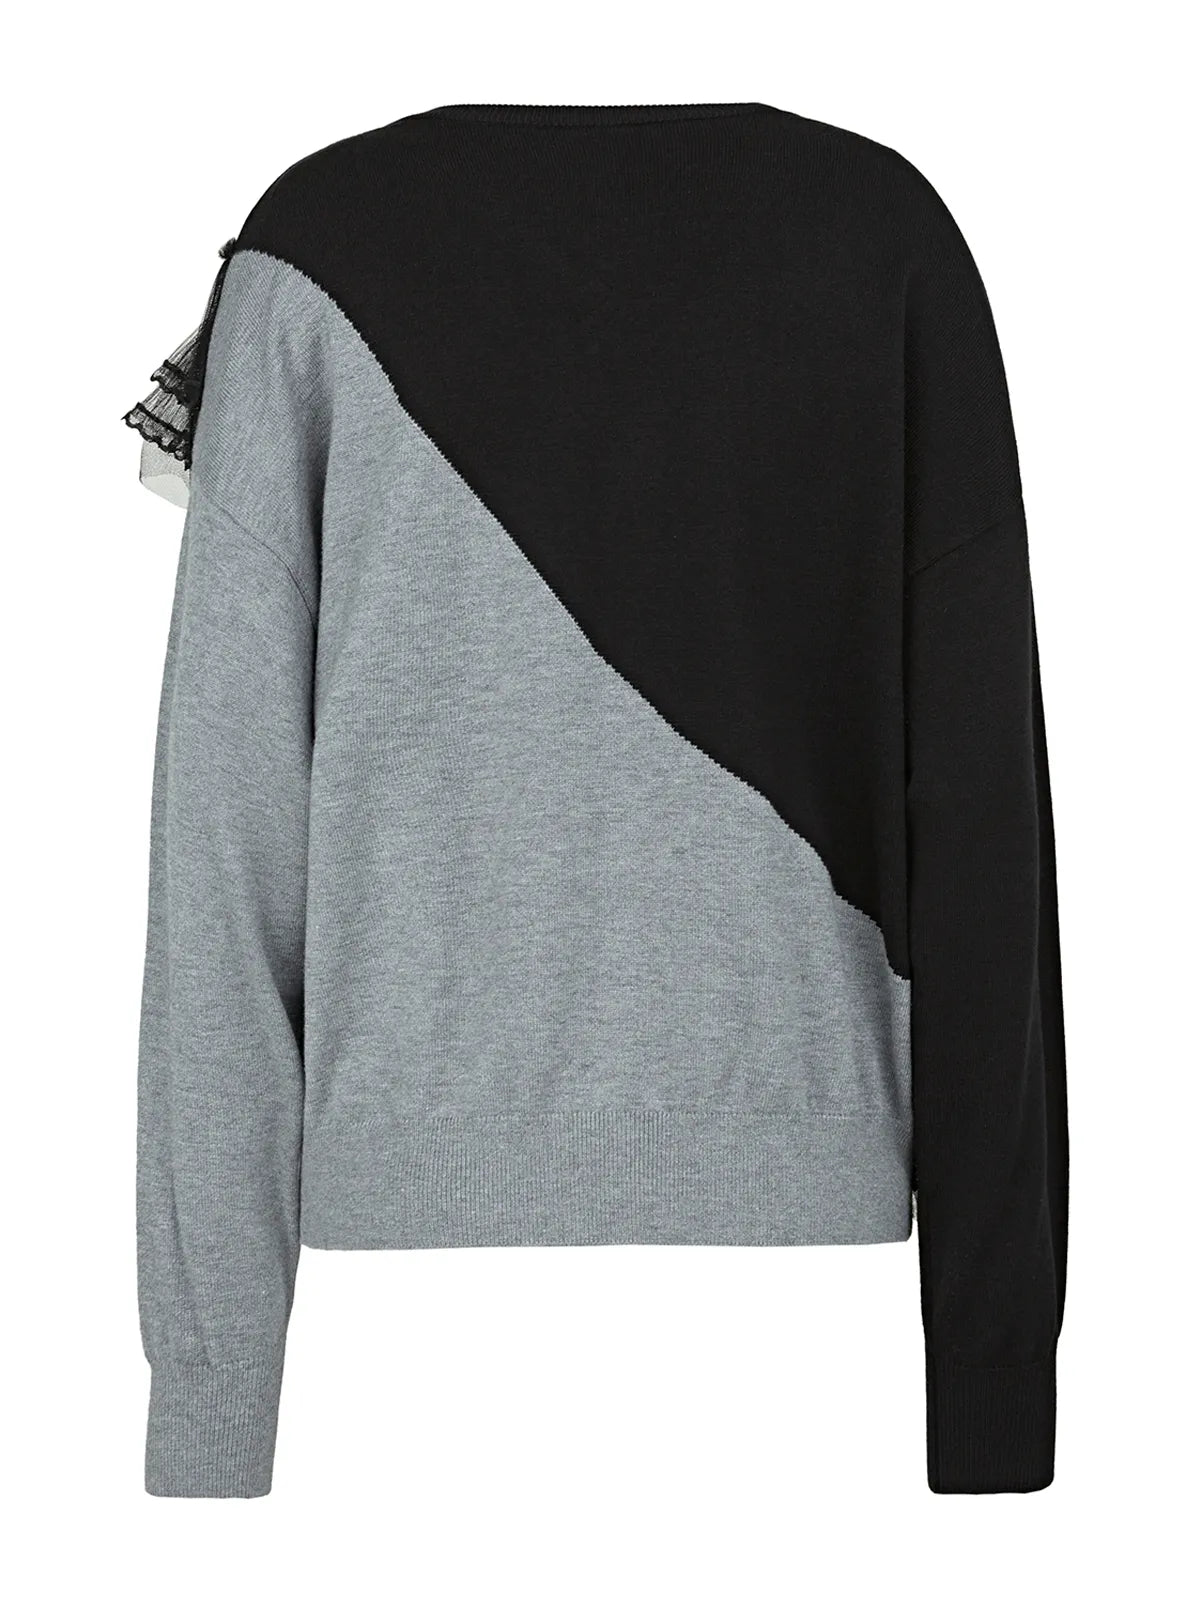 Achieve a timeless and fashionable look with this color-blocked sweater, featuring a classic black and gray palette and a modern diagonal cut design that effortlessly combines tradition with trend.